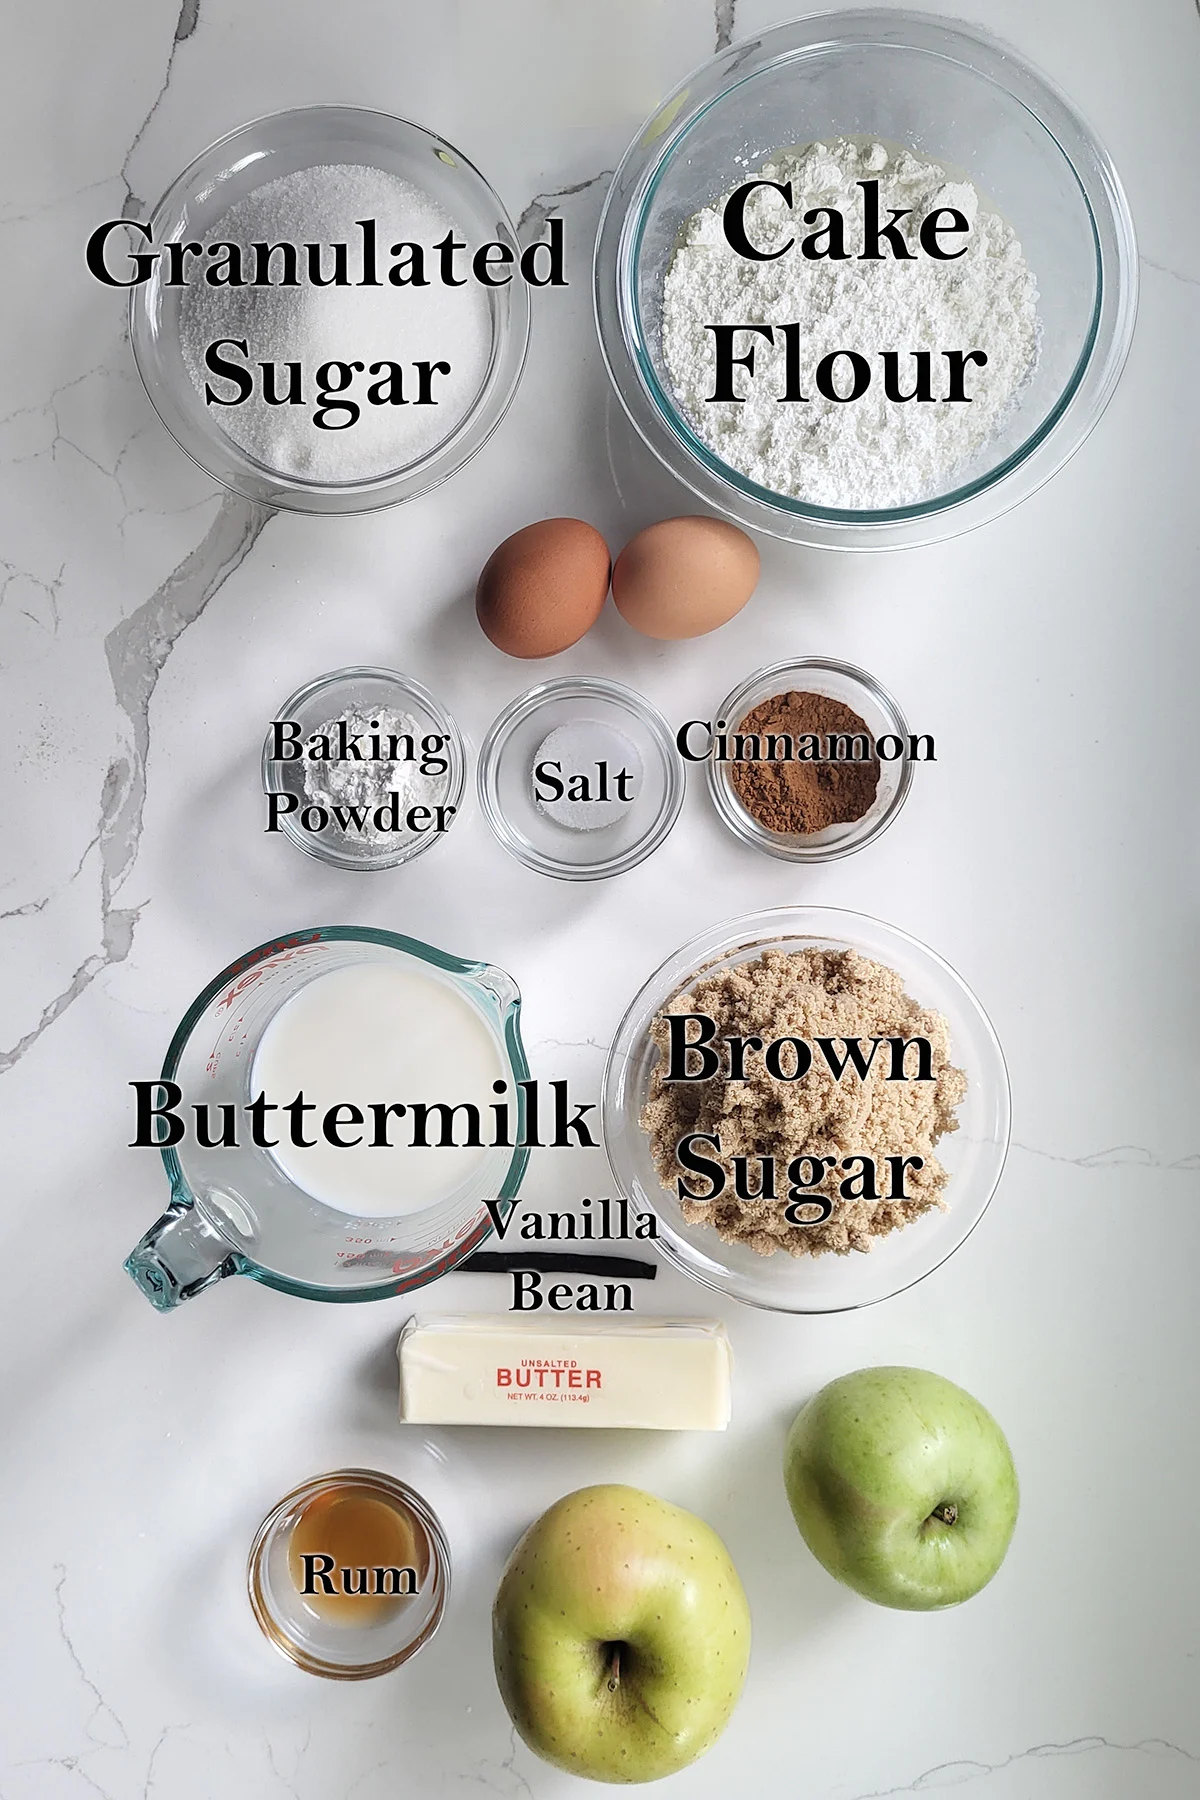 ingredients for apple upside down cake in glass bowls on a white surface.